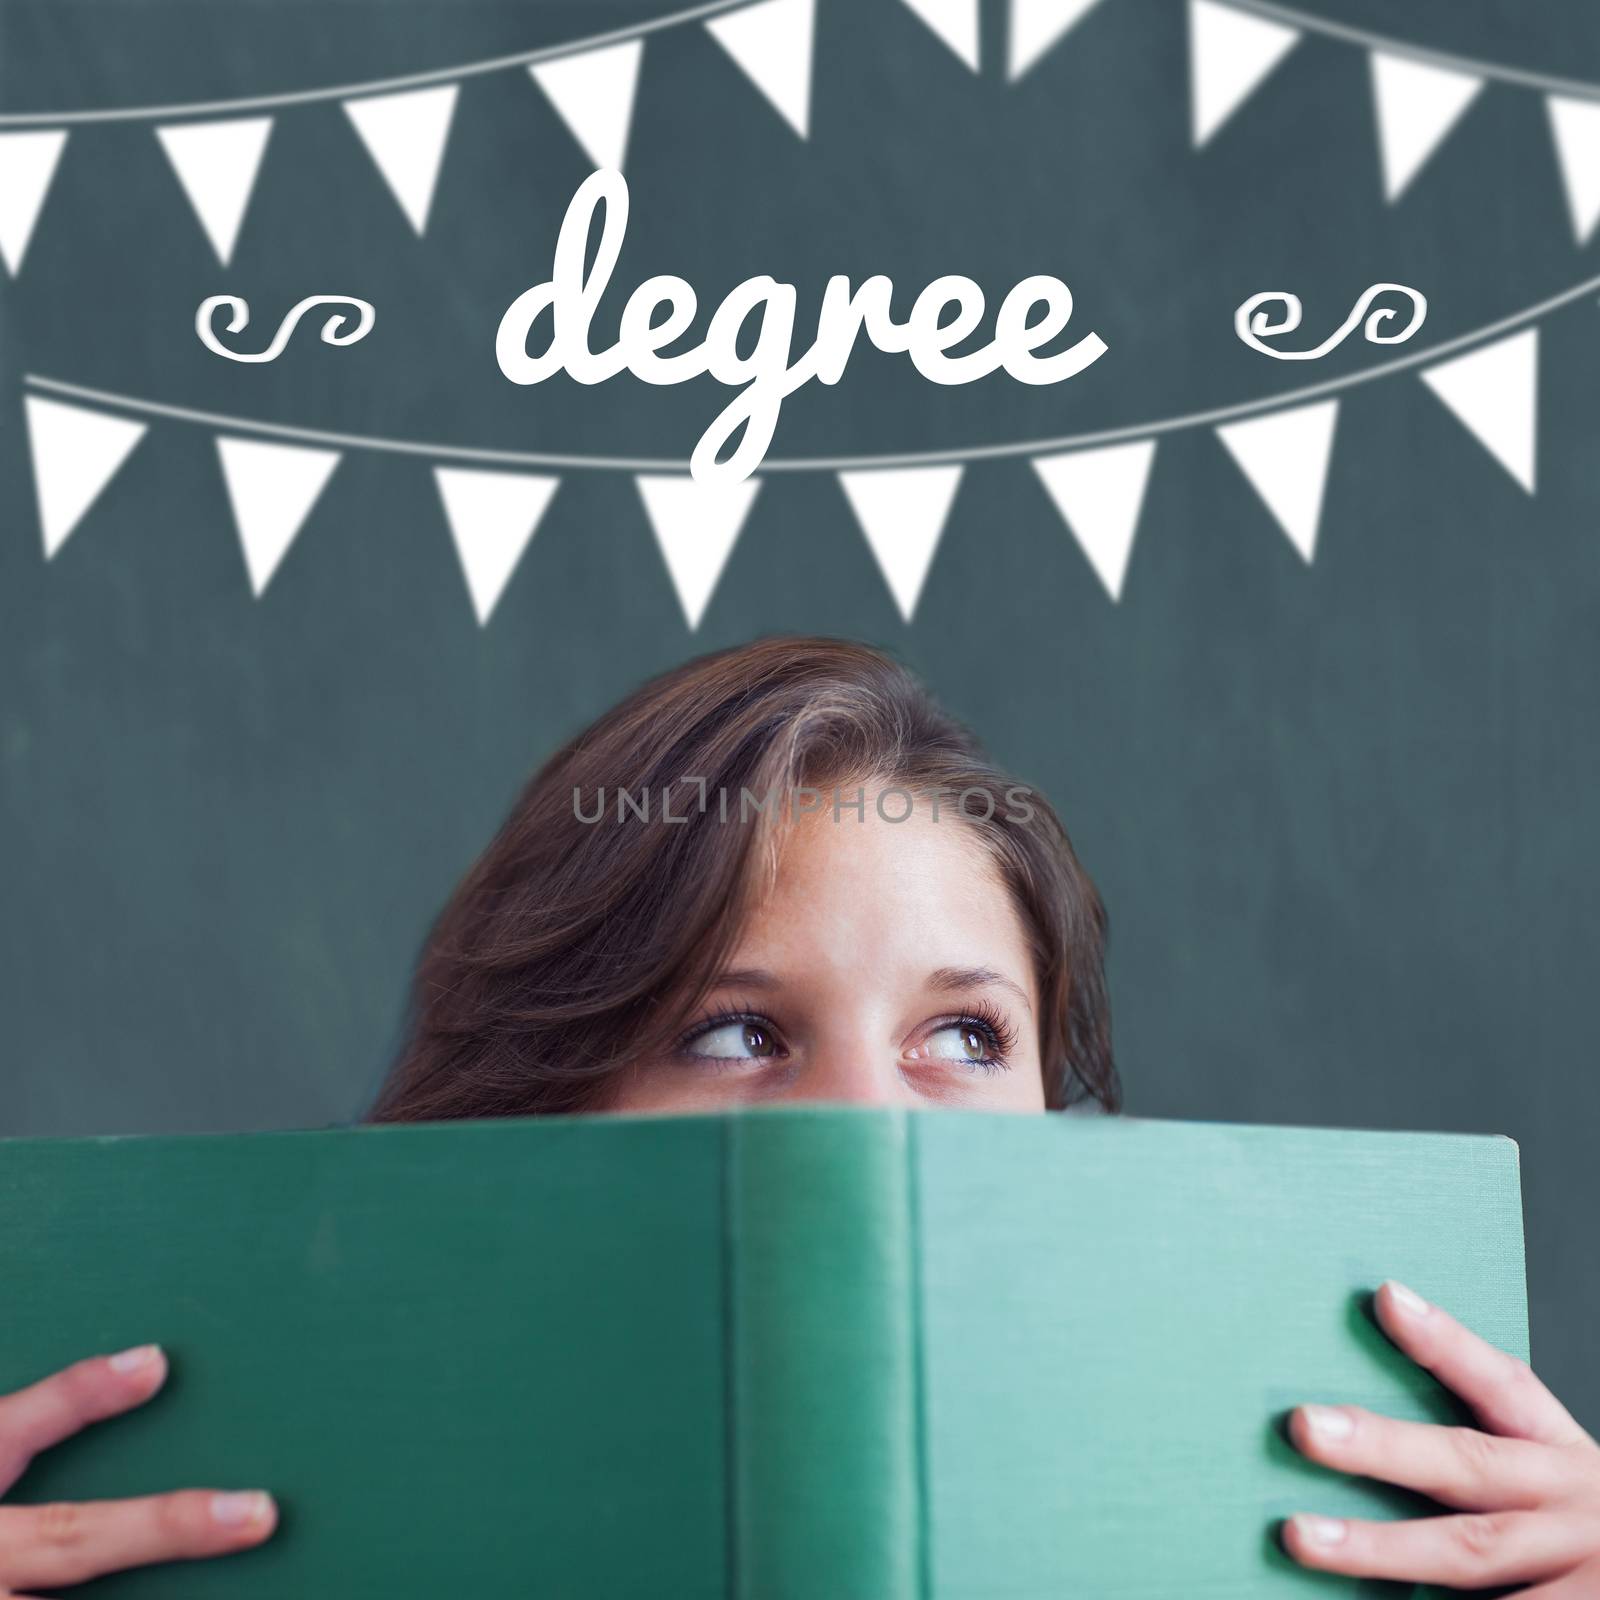 Degree against student holding book by Wavebreakmedia